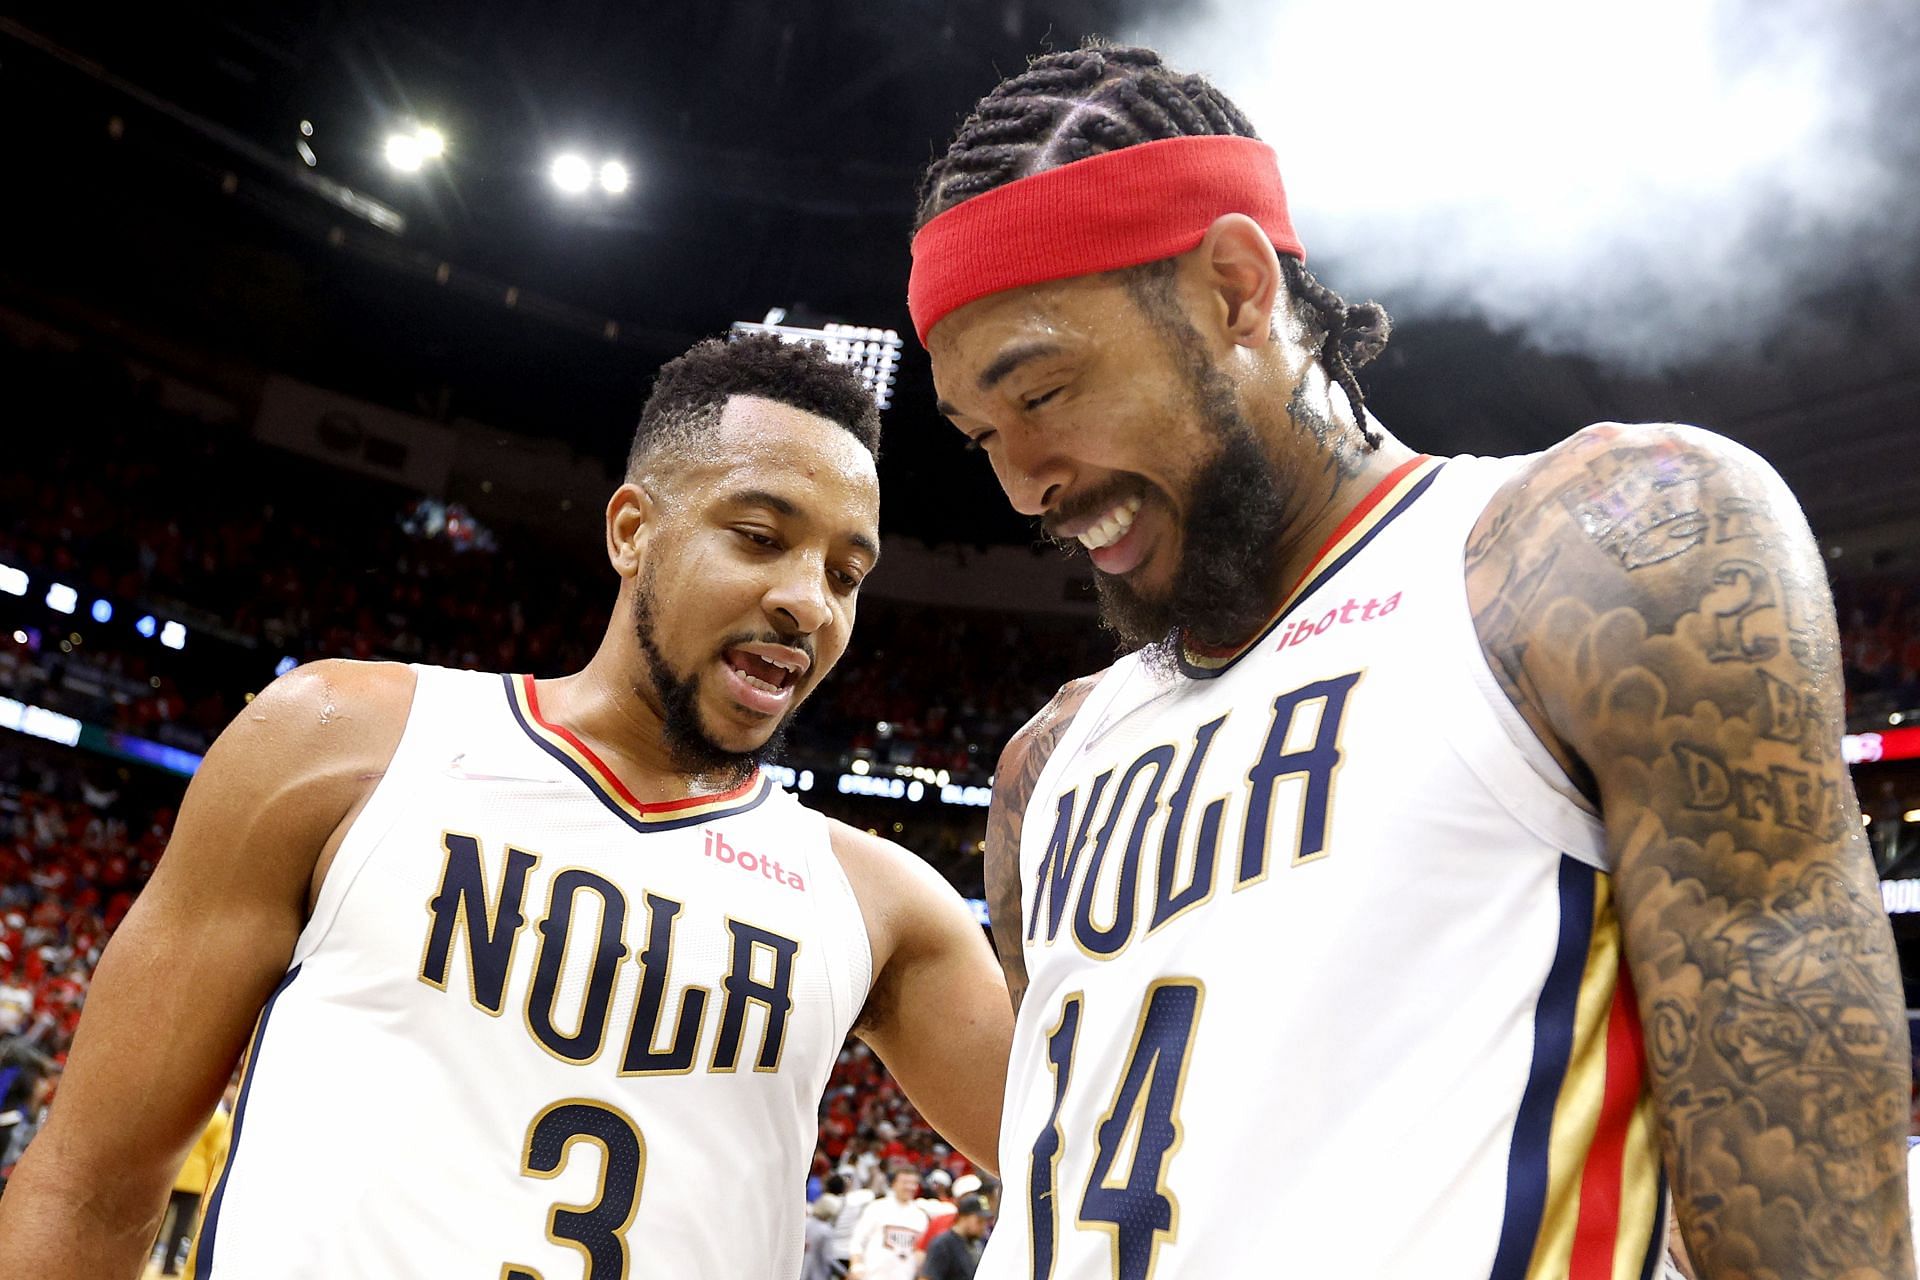 CJ McCollum and Brandon Ingram of the New Orleans Pelicans in the NBA Play-In Tournament